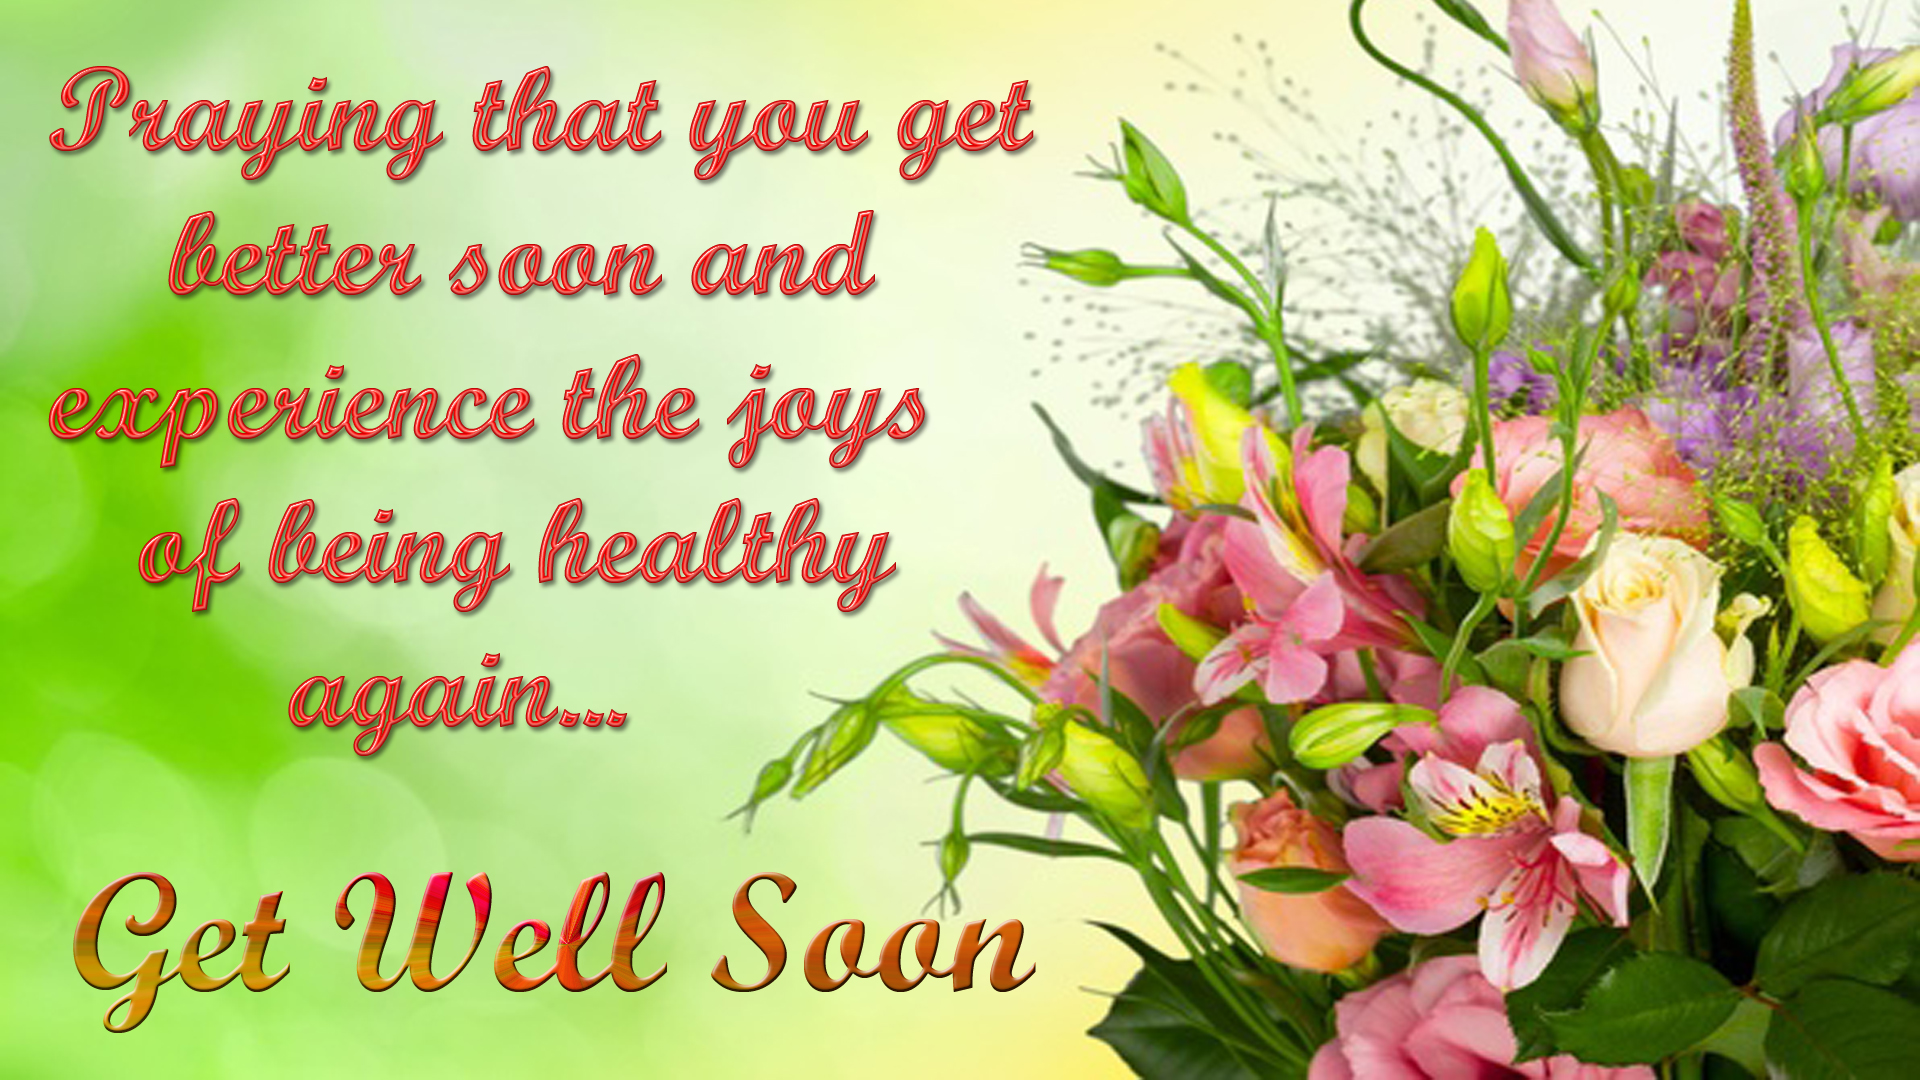 get well soon wishes 2018 image